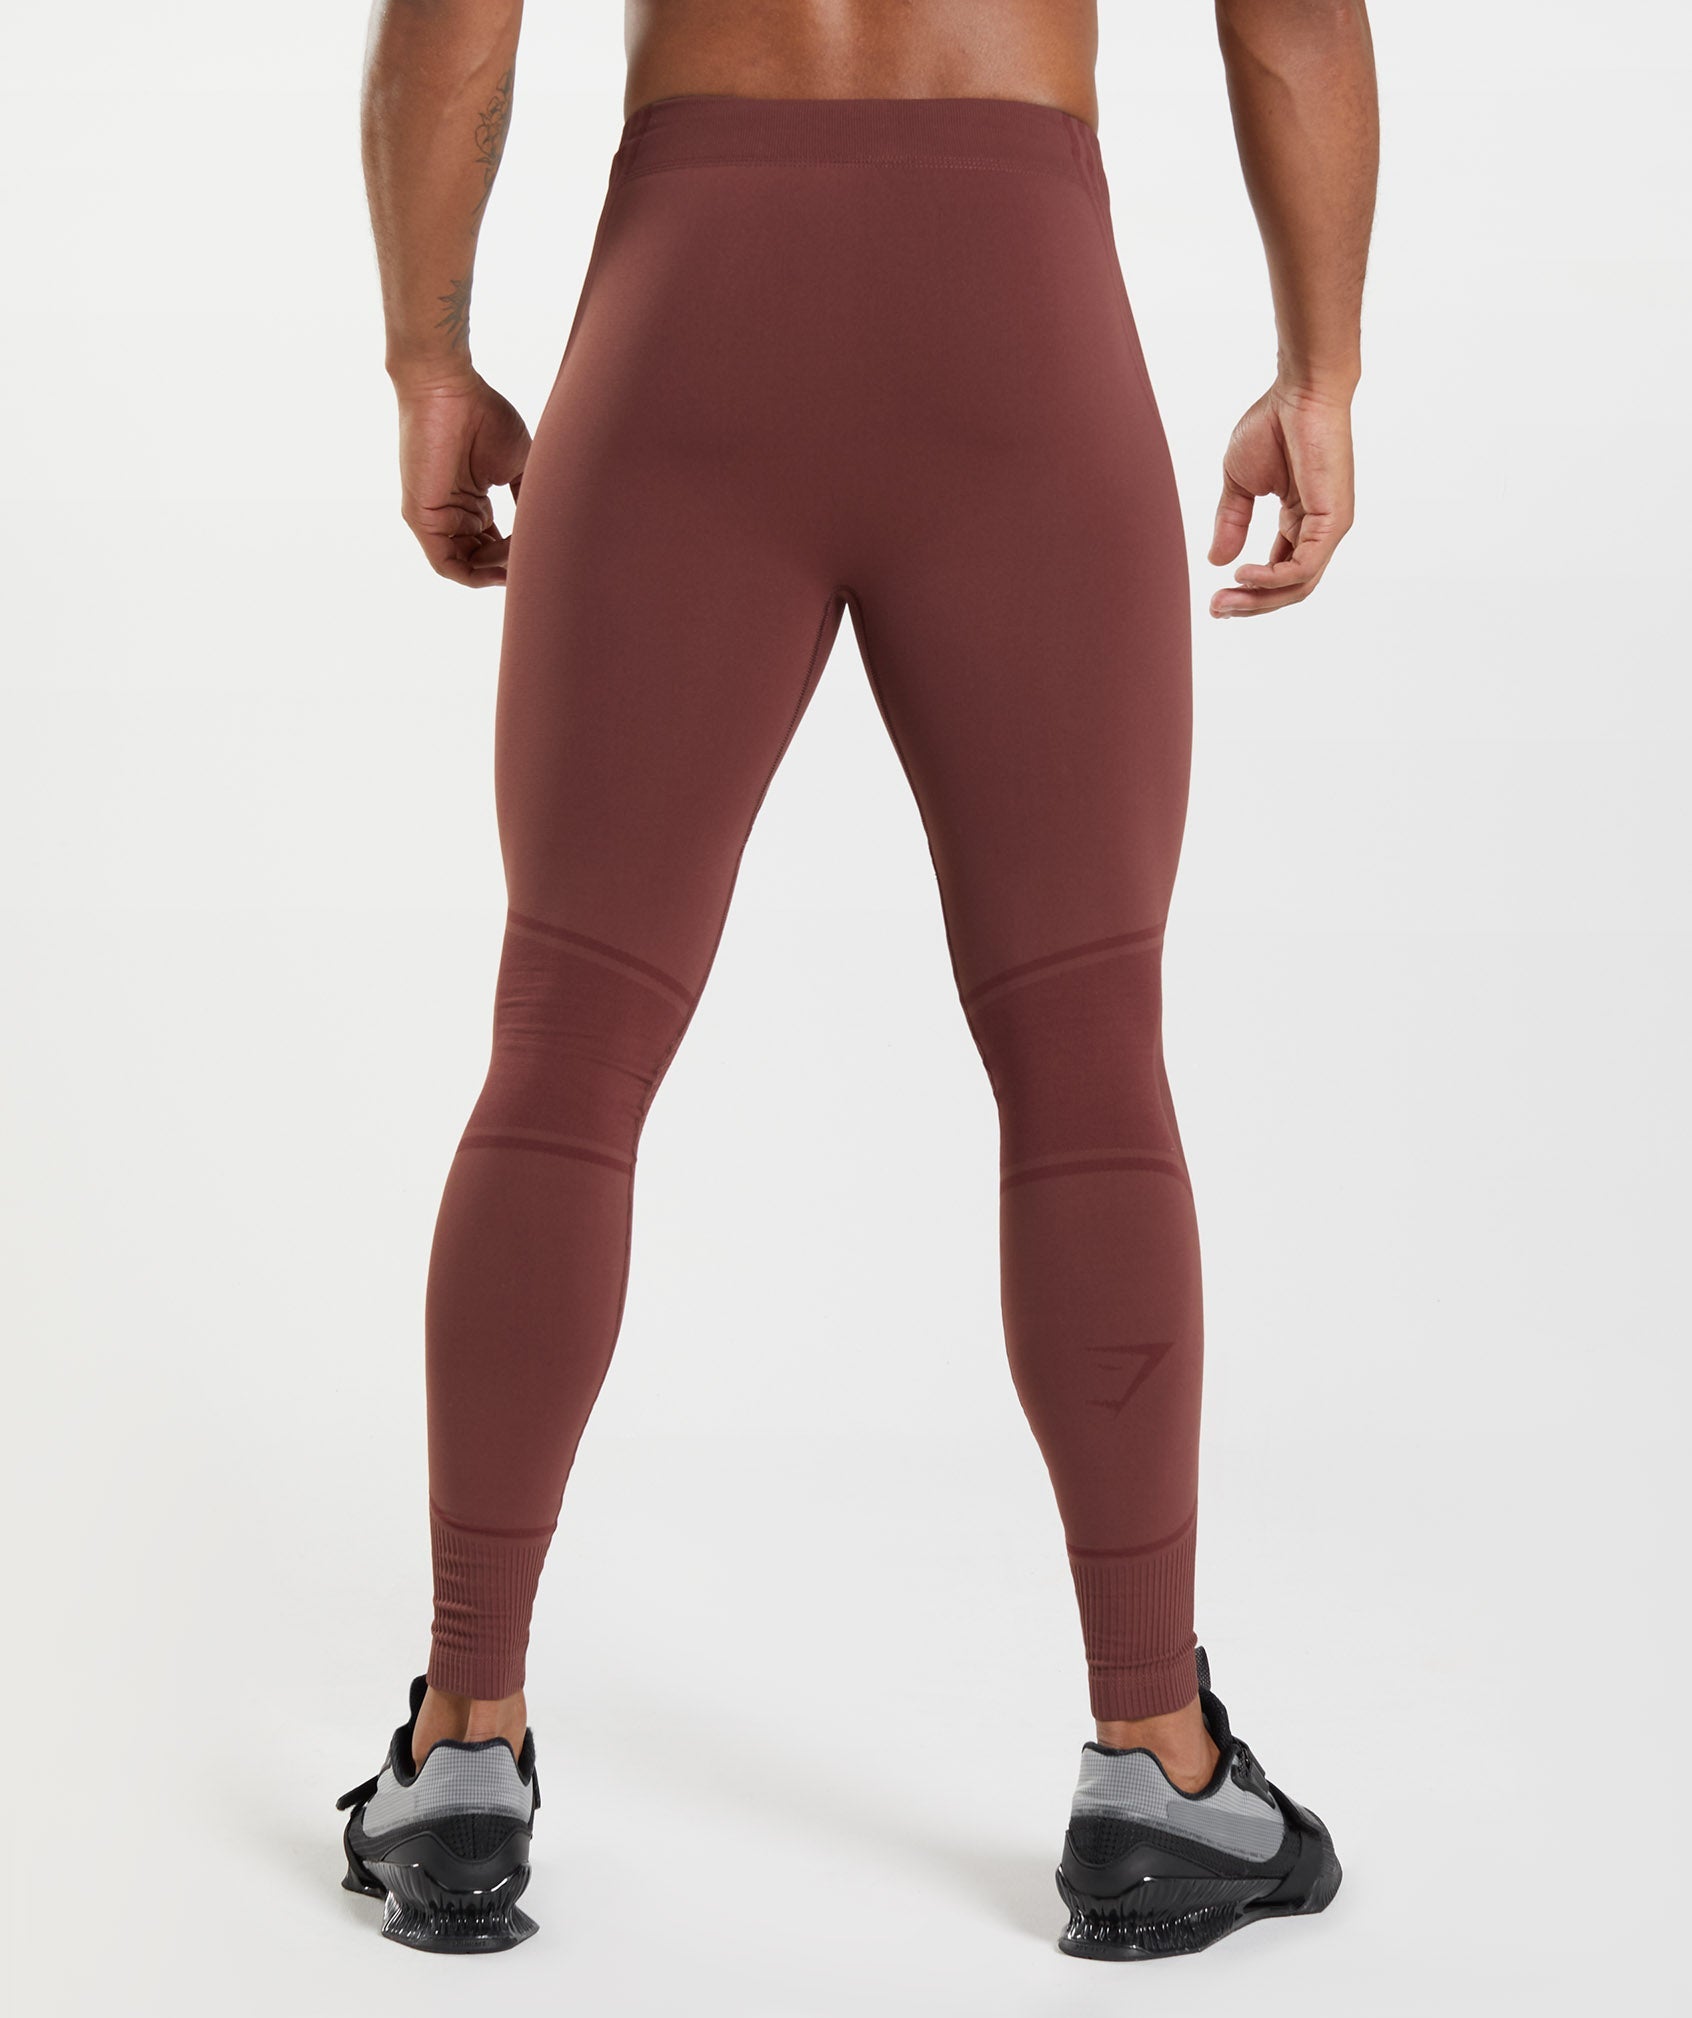 315 Seamless Tights in Cherry Brown/Athletic Maroon - view 2